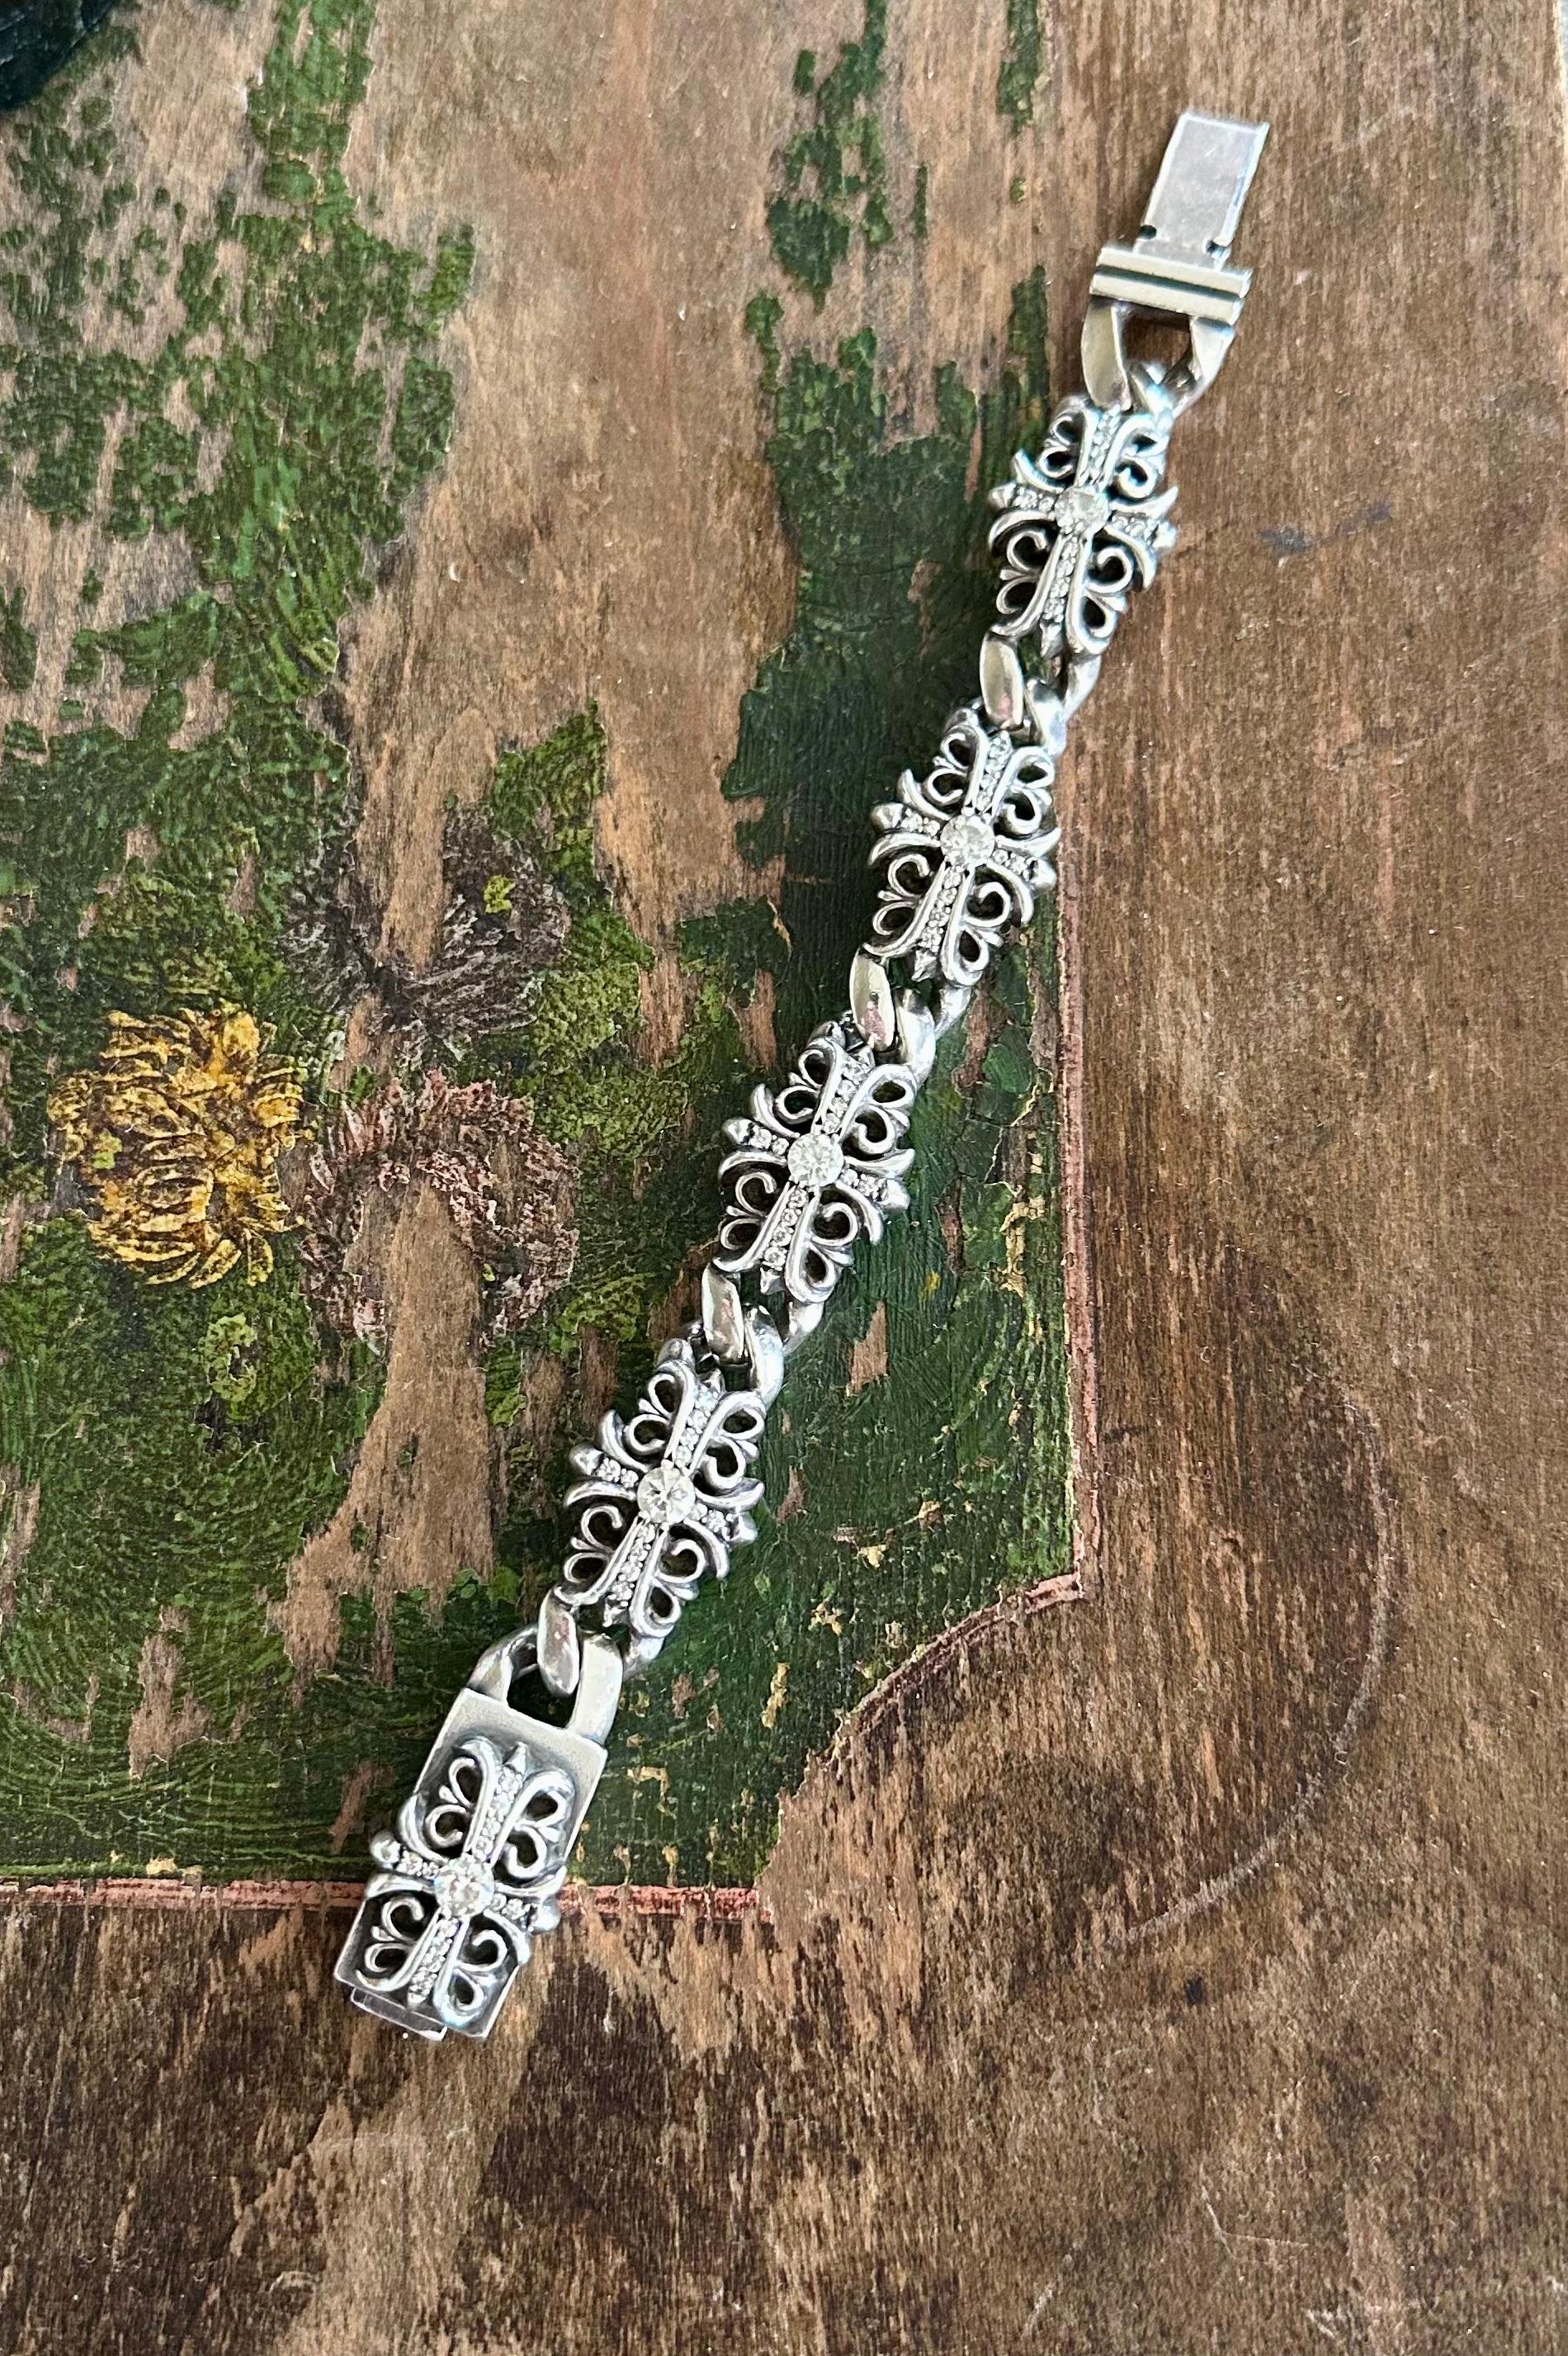 Chrome Hearts 1990s full diamond fleur-de-lis silver bracelet unisex 7.25 inches in length 1/2 inch with each section of the bracelet contains a half carat round diamond and numerous smaller diamonds parade set. Total Diamond weighed 5 cts
The